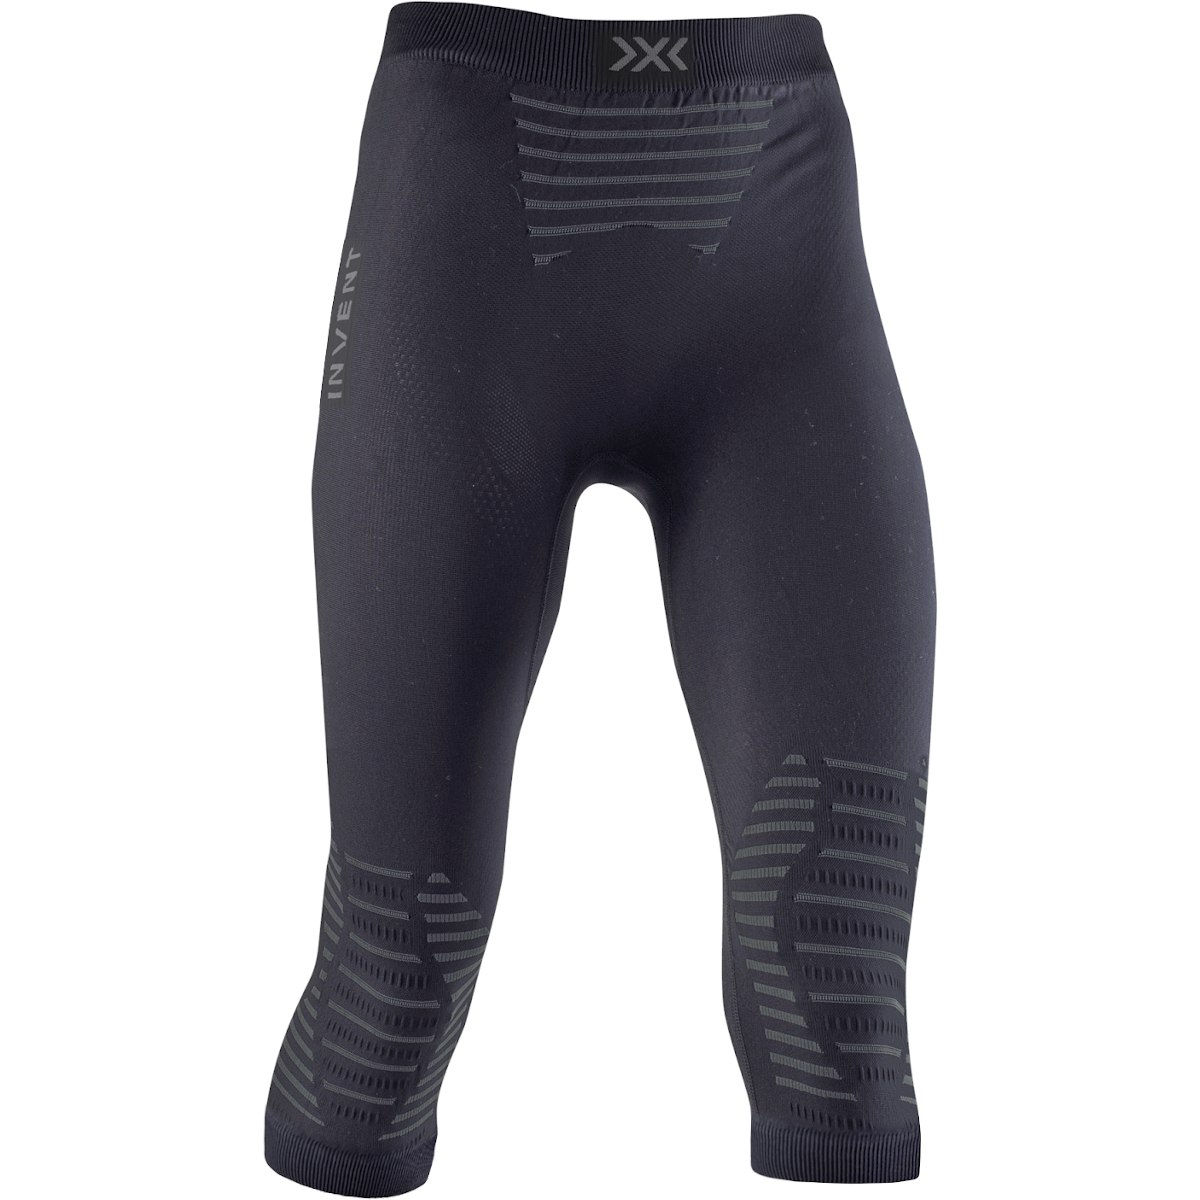 Image of X-Bionic Invent 4.0 3/4 Pants for Women - black/charcoal